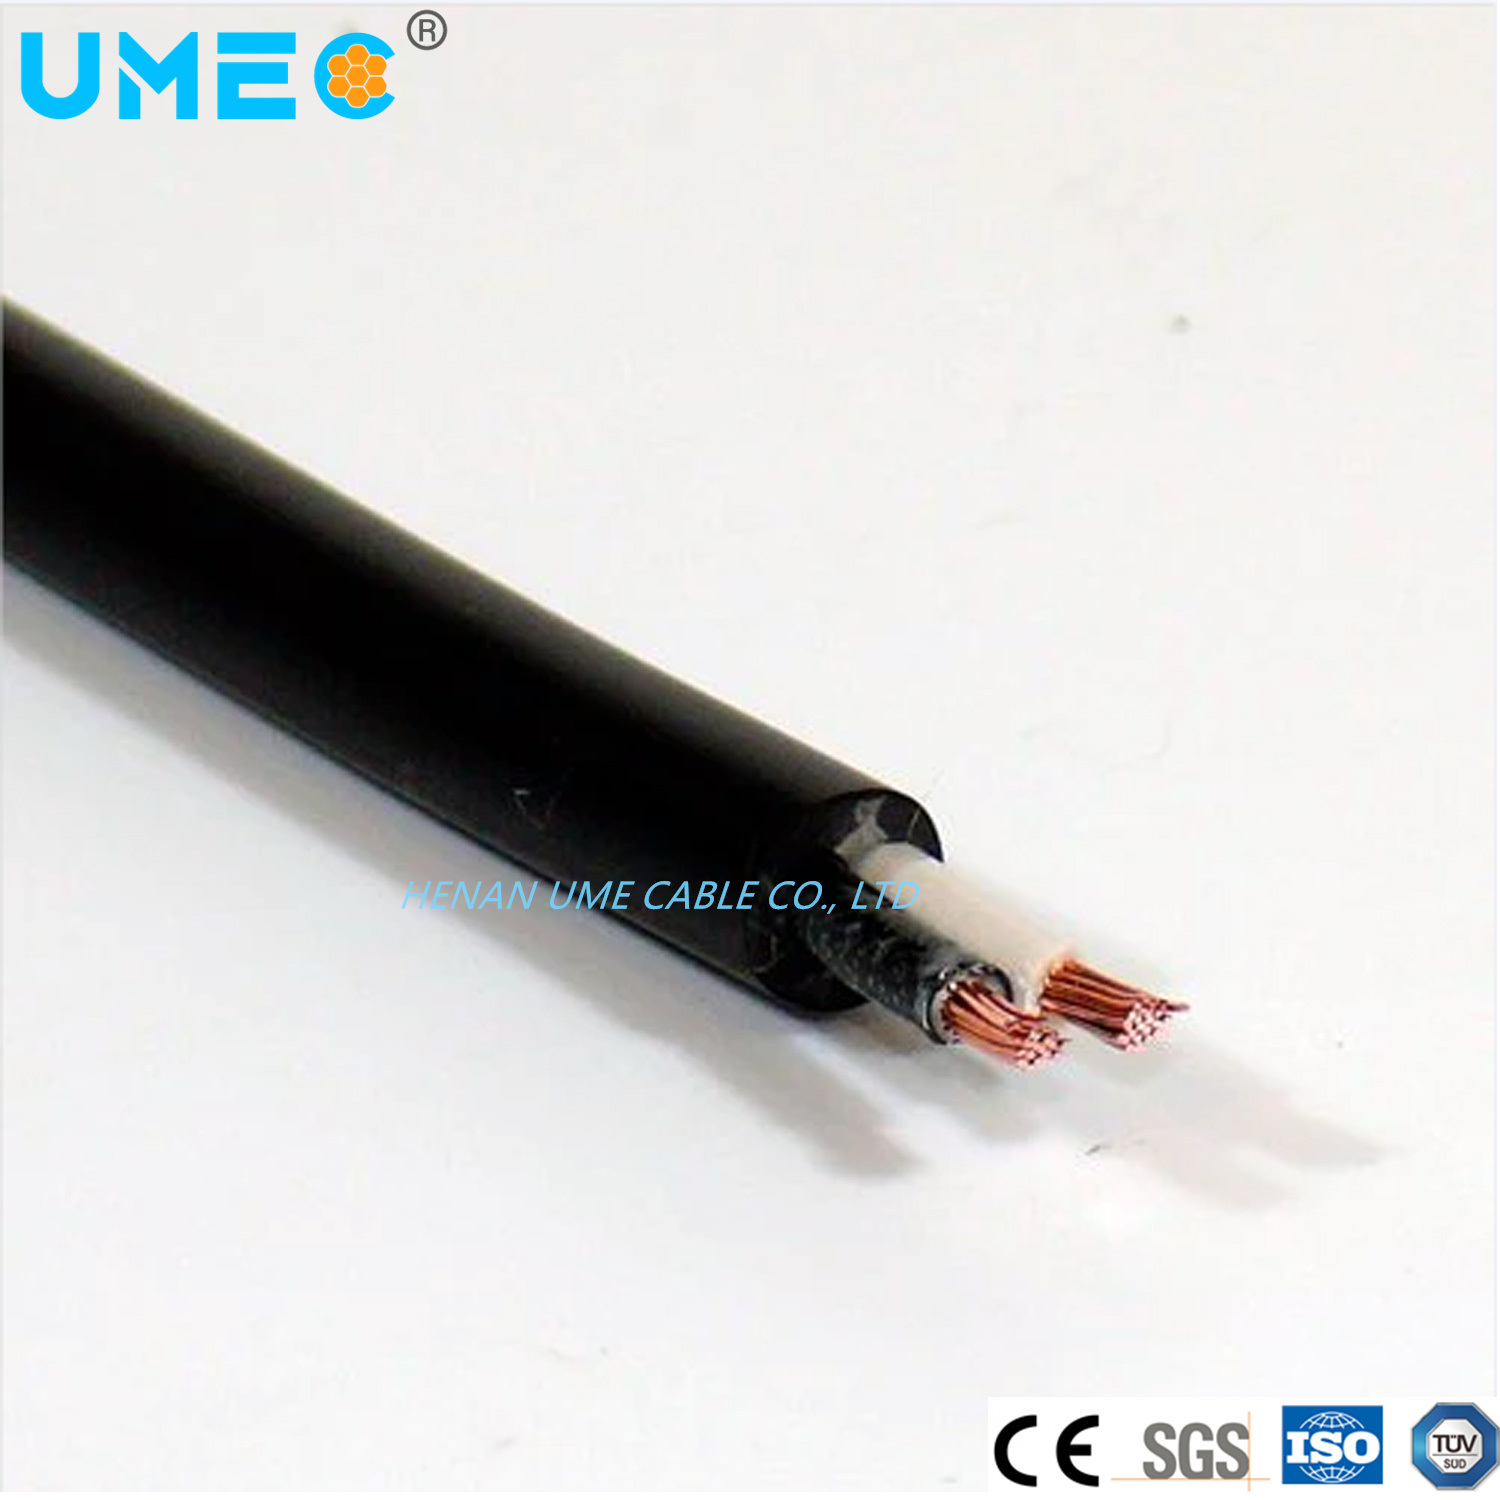 Wholesale Electrical Cable Wire Tjs-N Wire Tsj Wire 20 AWG up to 6AWG